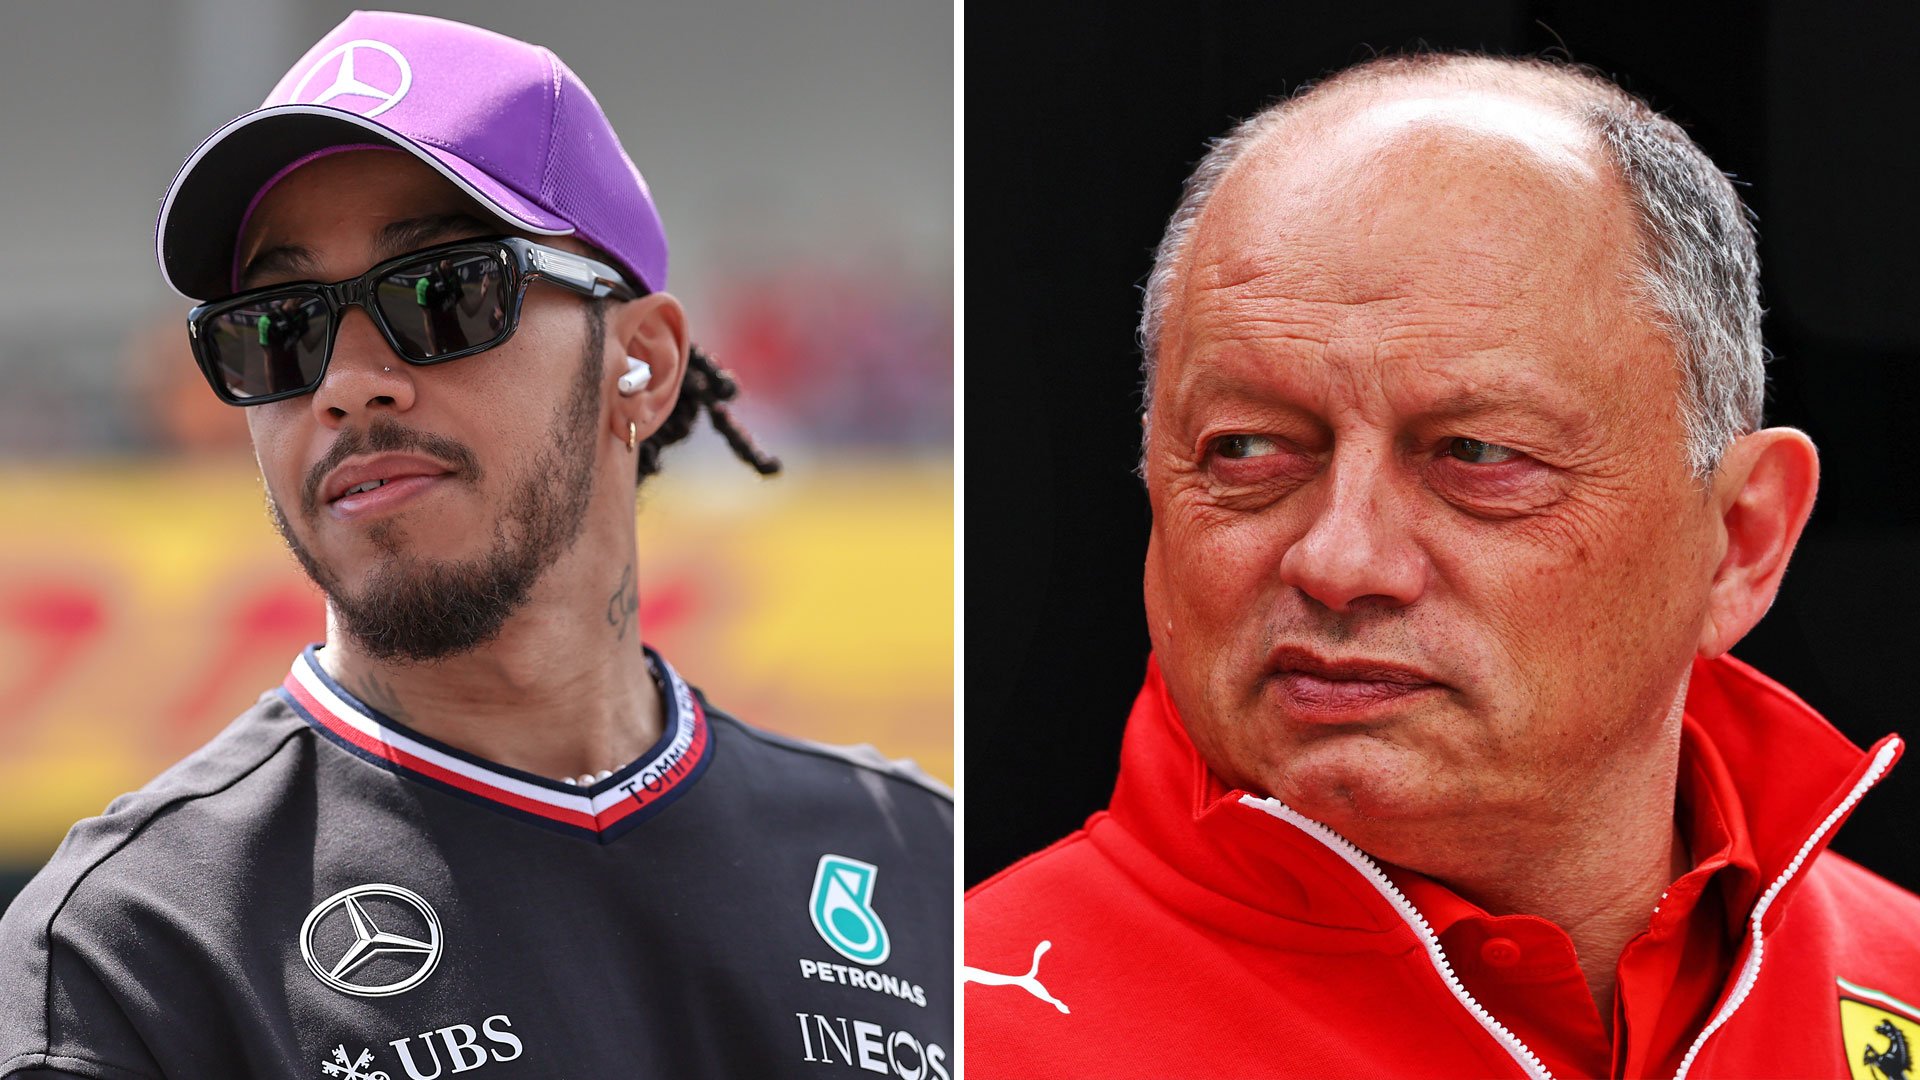 Ferrari chief snaps at reporter over Lewis Hamilton question and issues blunt response about F1 rival